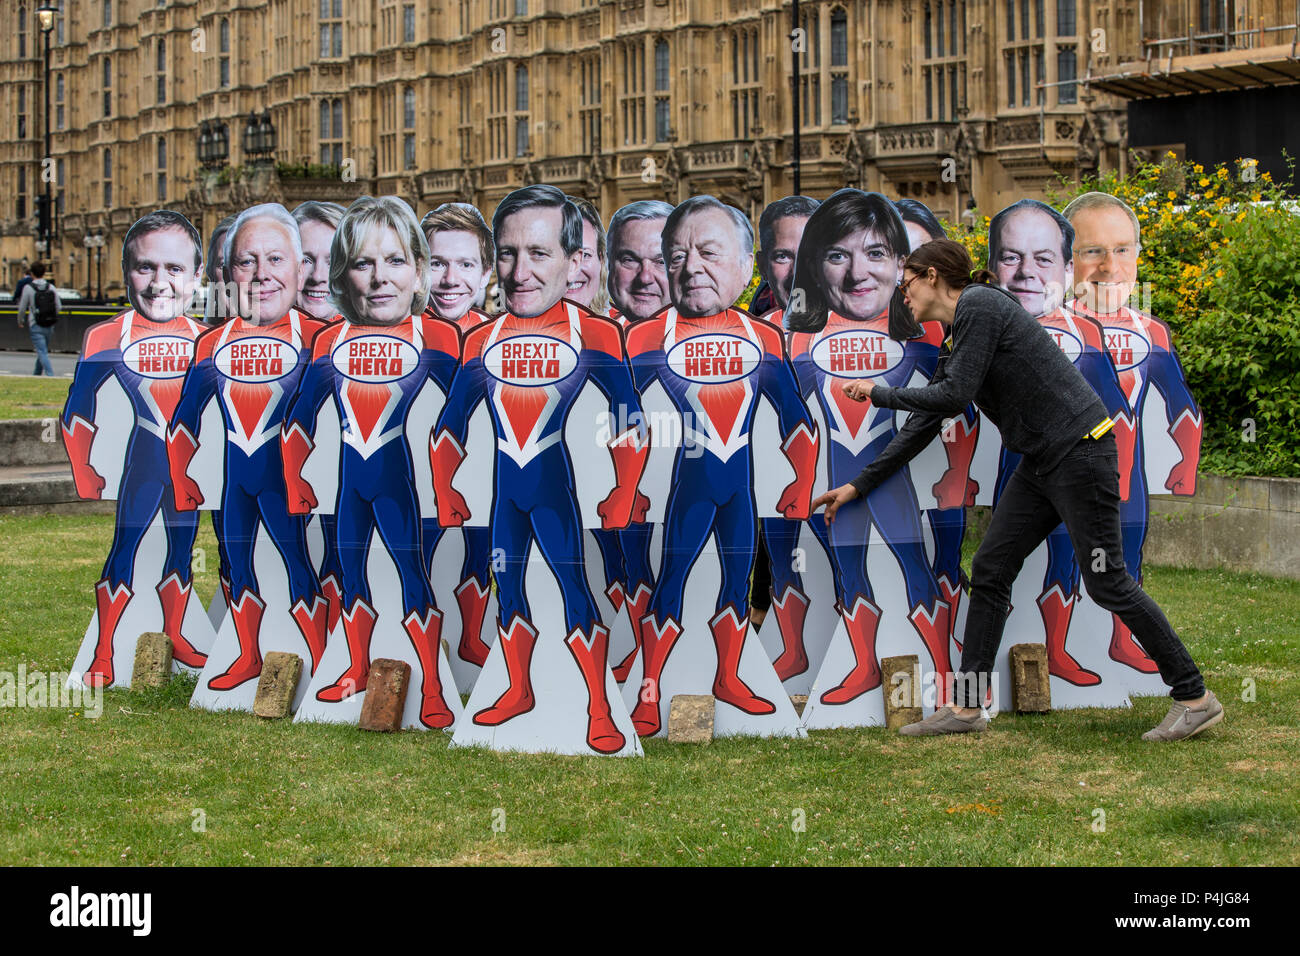 15 superhero cutouts with faces of key Tory rebel MPs outside Parliament ahead of Wednesday's Commons vote to give Parliament a vote on Brexit. Stock Photo